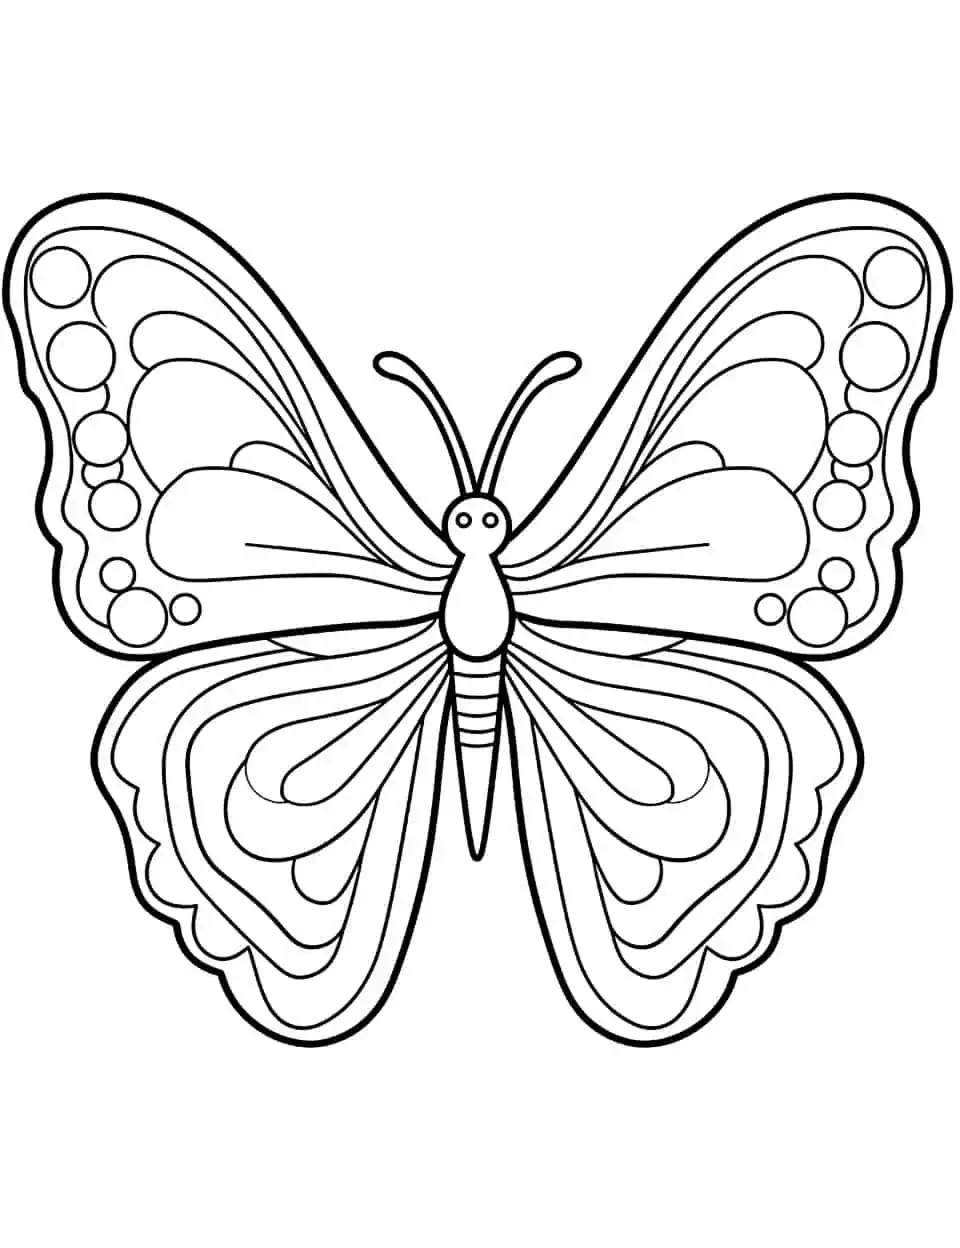 Bold Outlines Butterfly Coloring Page - A coloring page featuring a butterfly with bold and defined outlines for coloring practice.